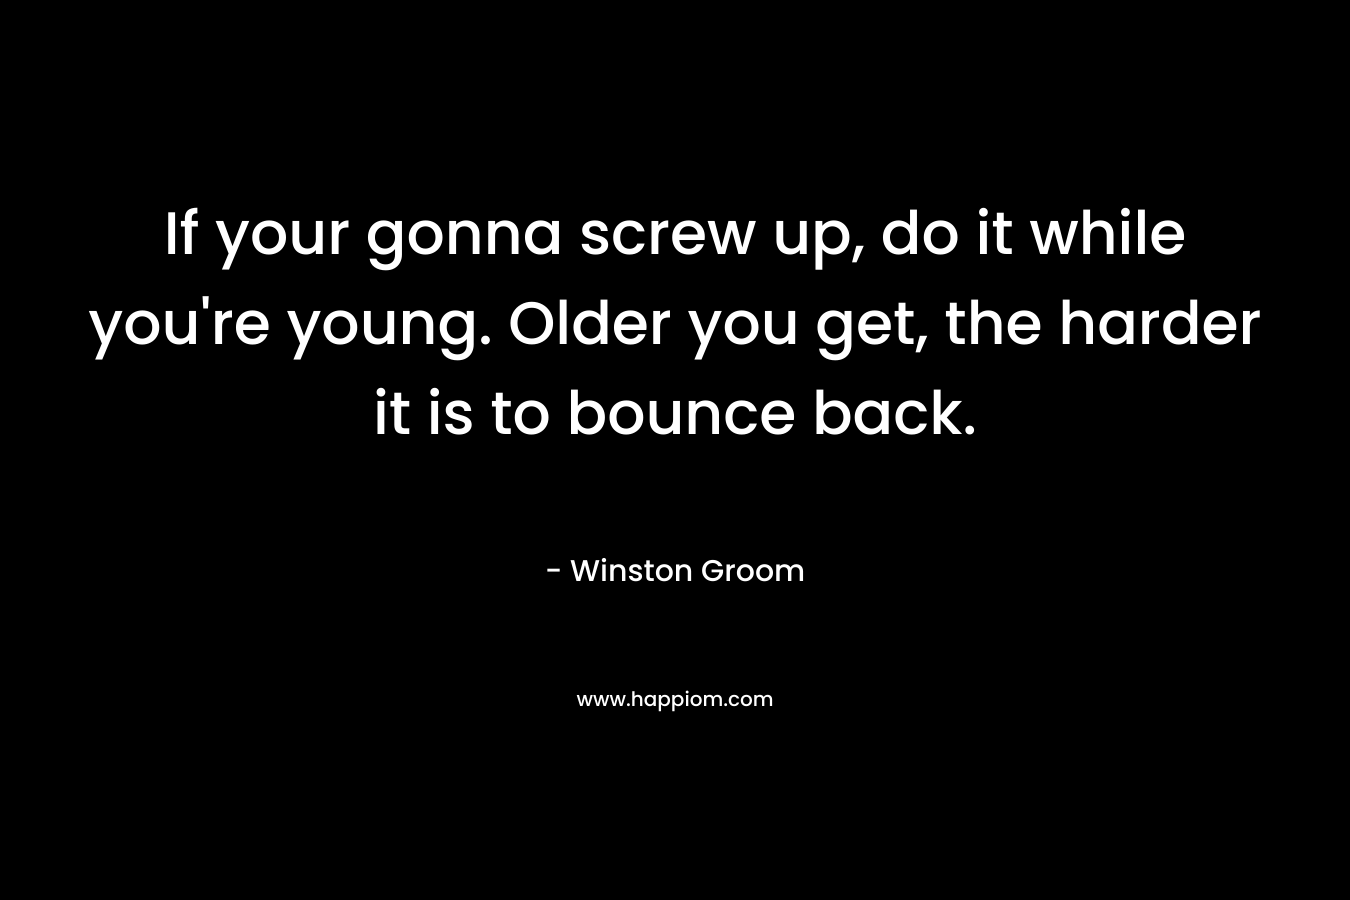 If your gonna screw up, do it while you’re young. Older you get, the harder it is to bounce back. – Winston Groom